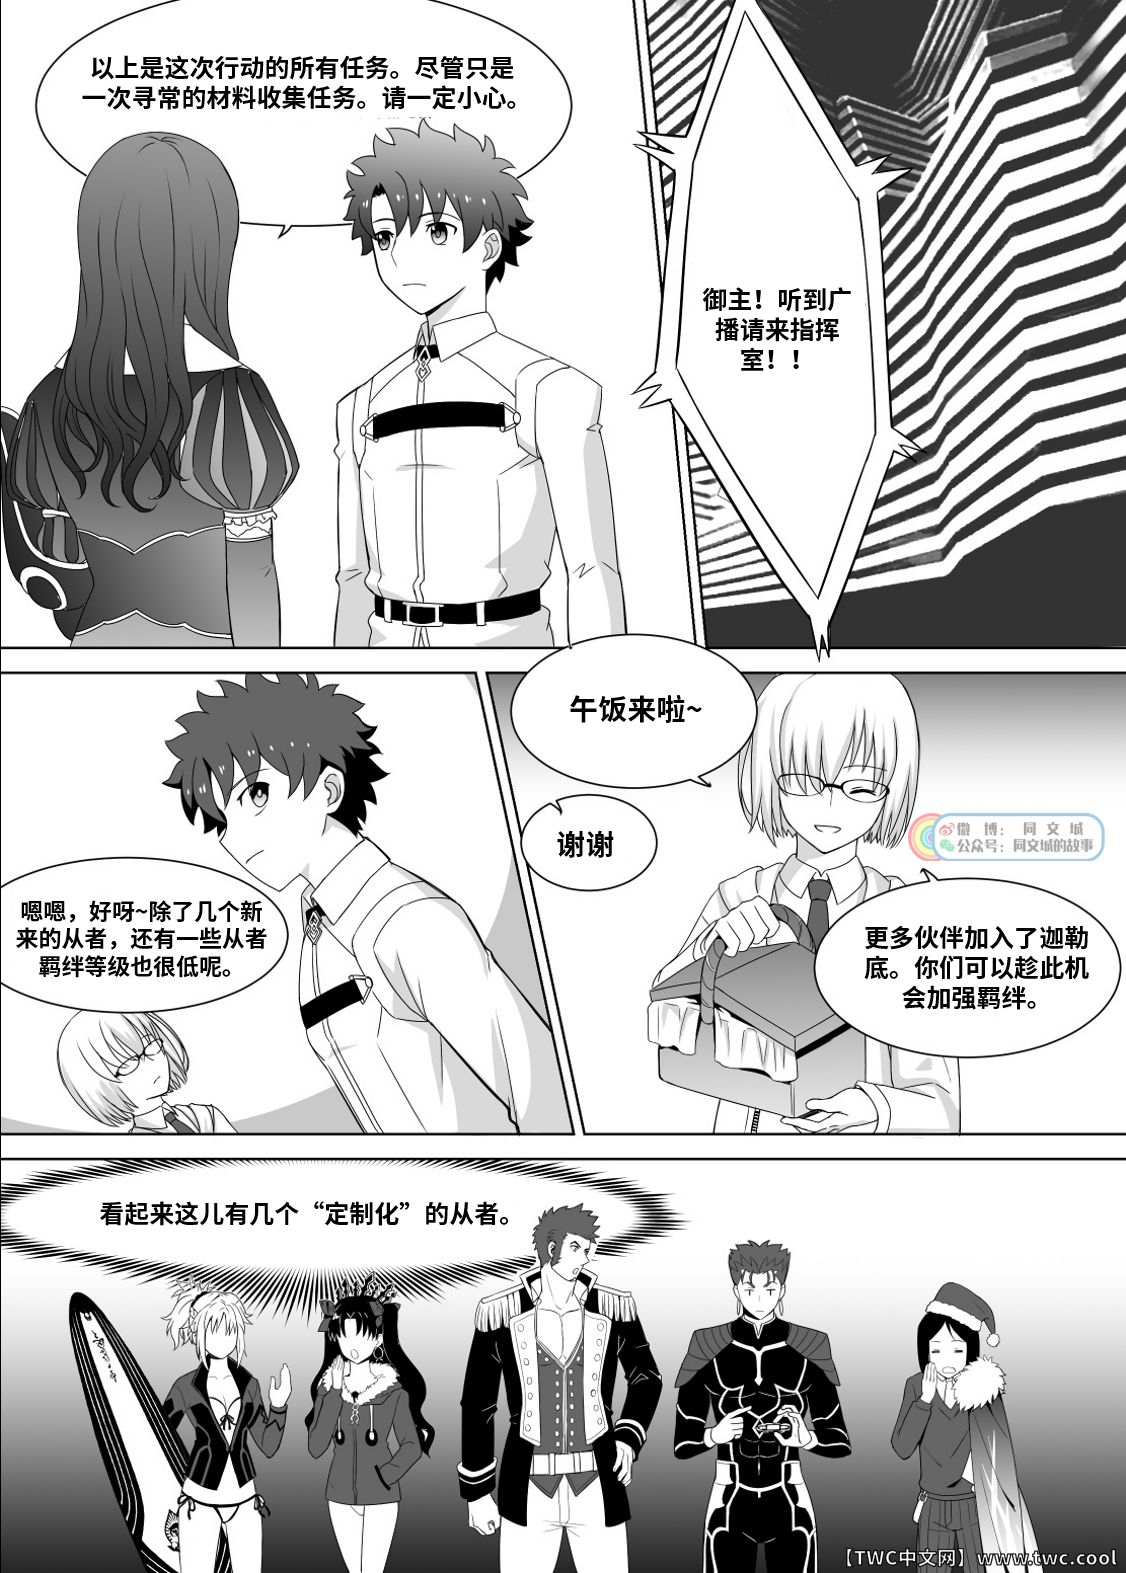 [Jtu] Ready to conquer (Fate/Grand Order) [Chinese] [同文城] [Digital] [Jtu] Ready to conquer (Fate Grand Order) [Chinese] [中国翻訳] [同文城]